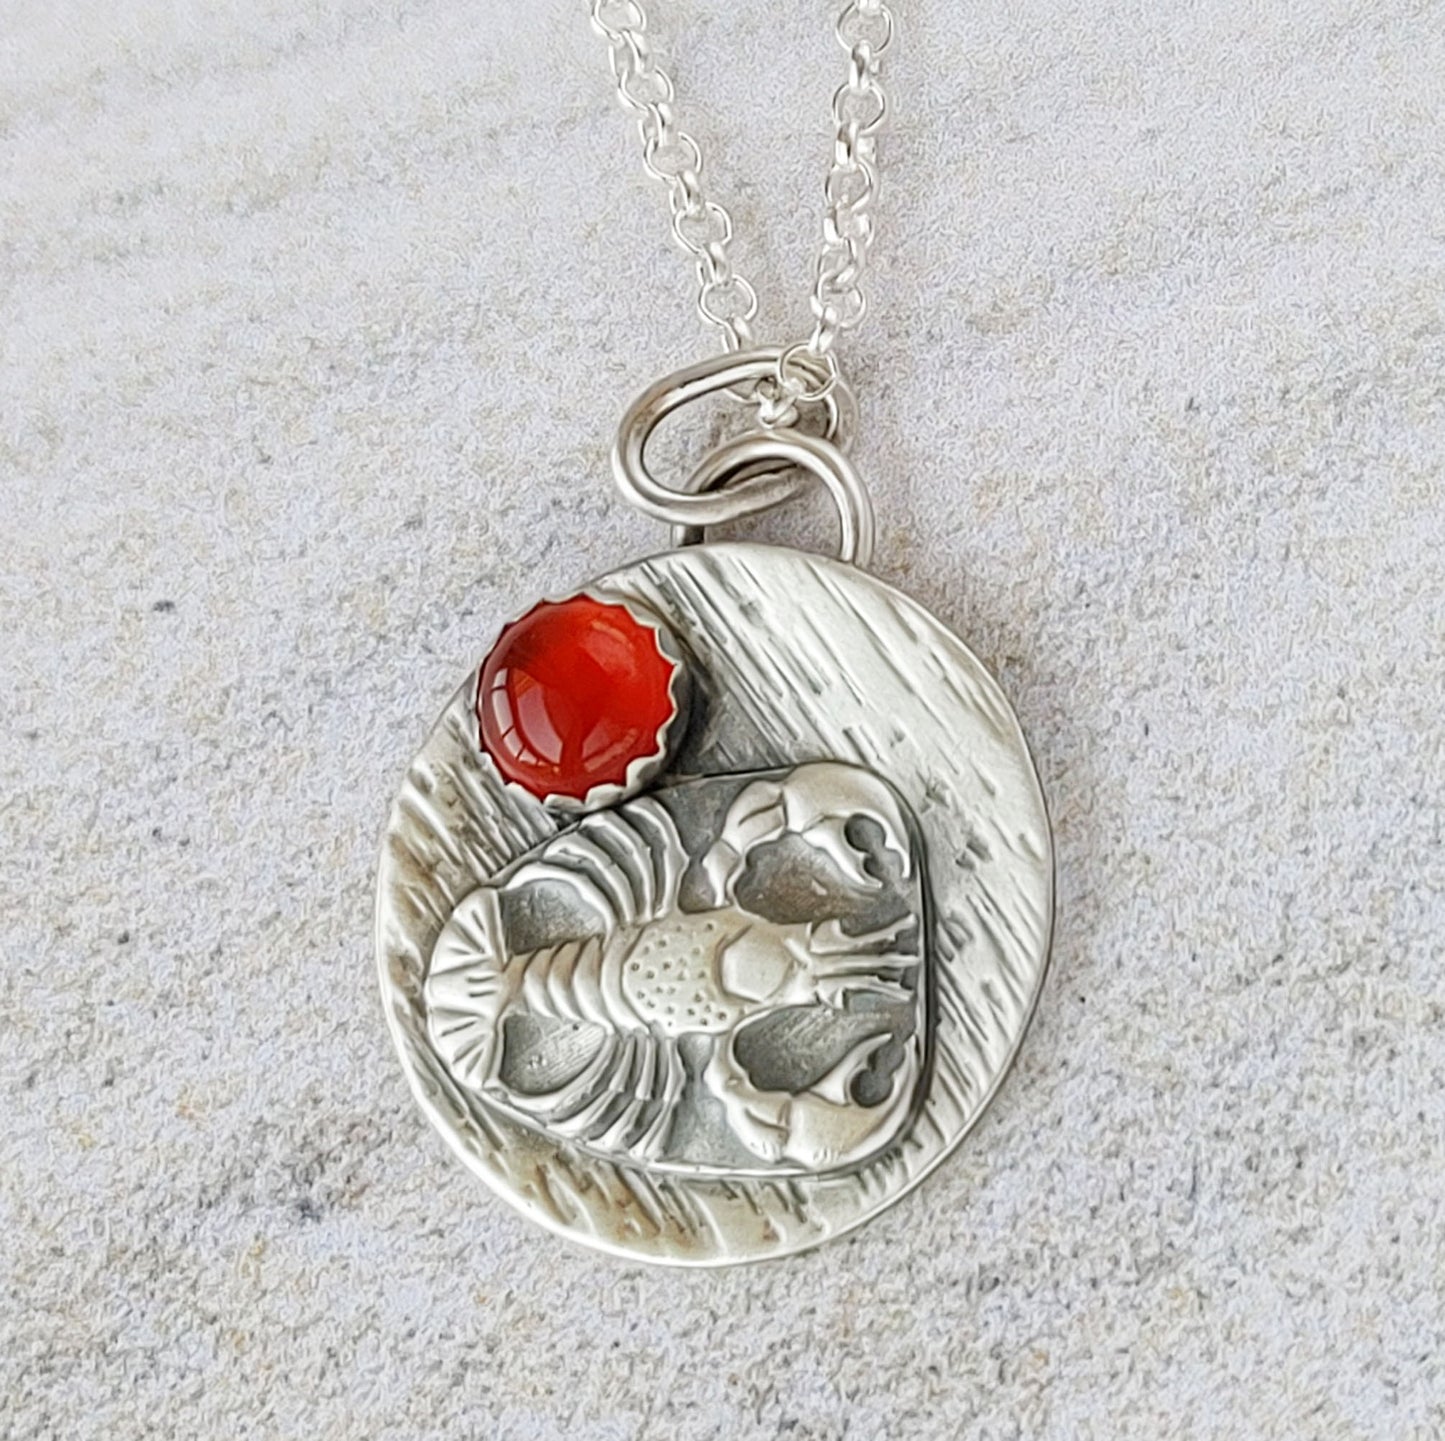 Lobster Sterling Silver Round Pendant with Carnelian Gemstone